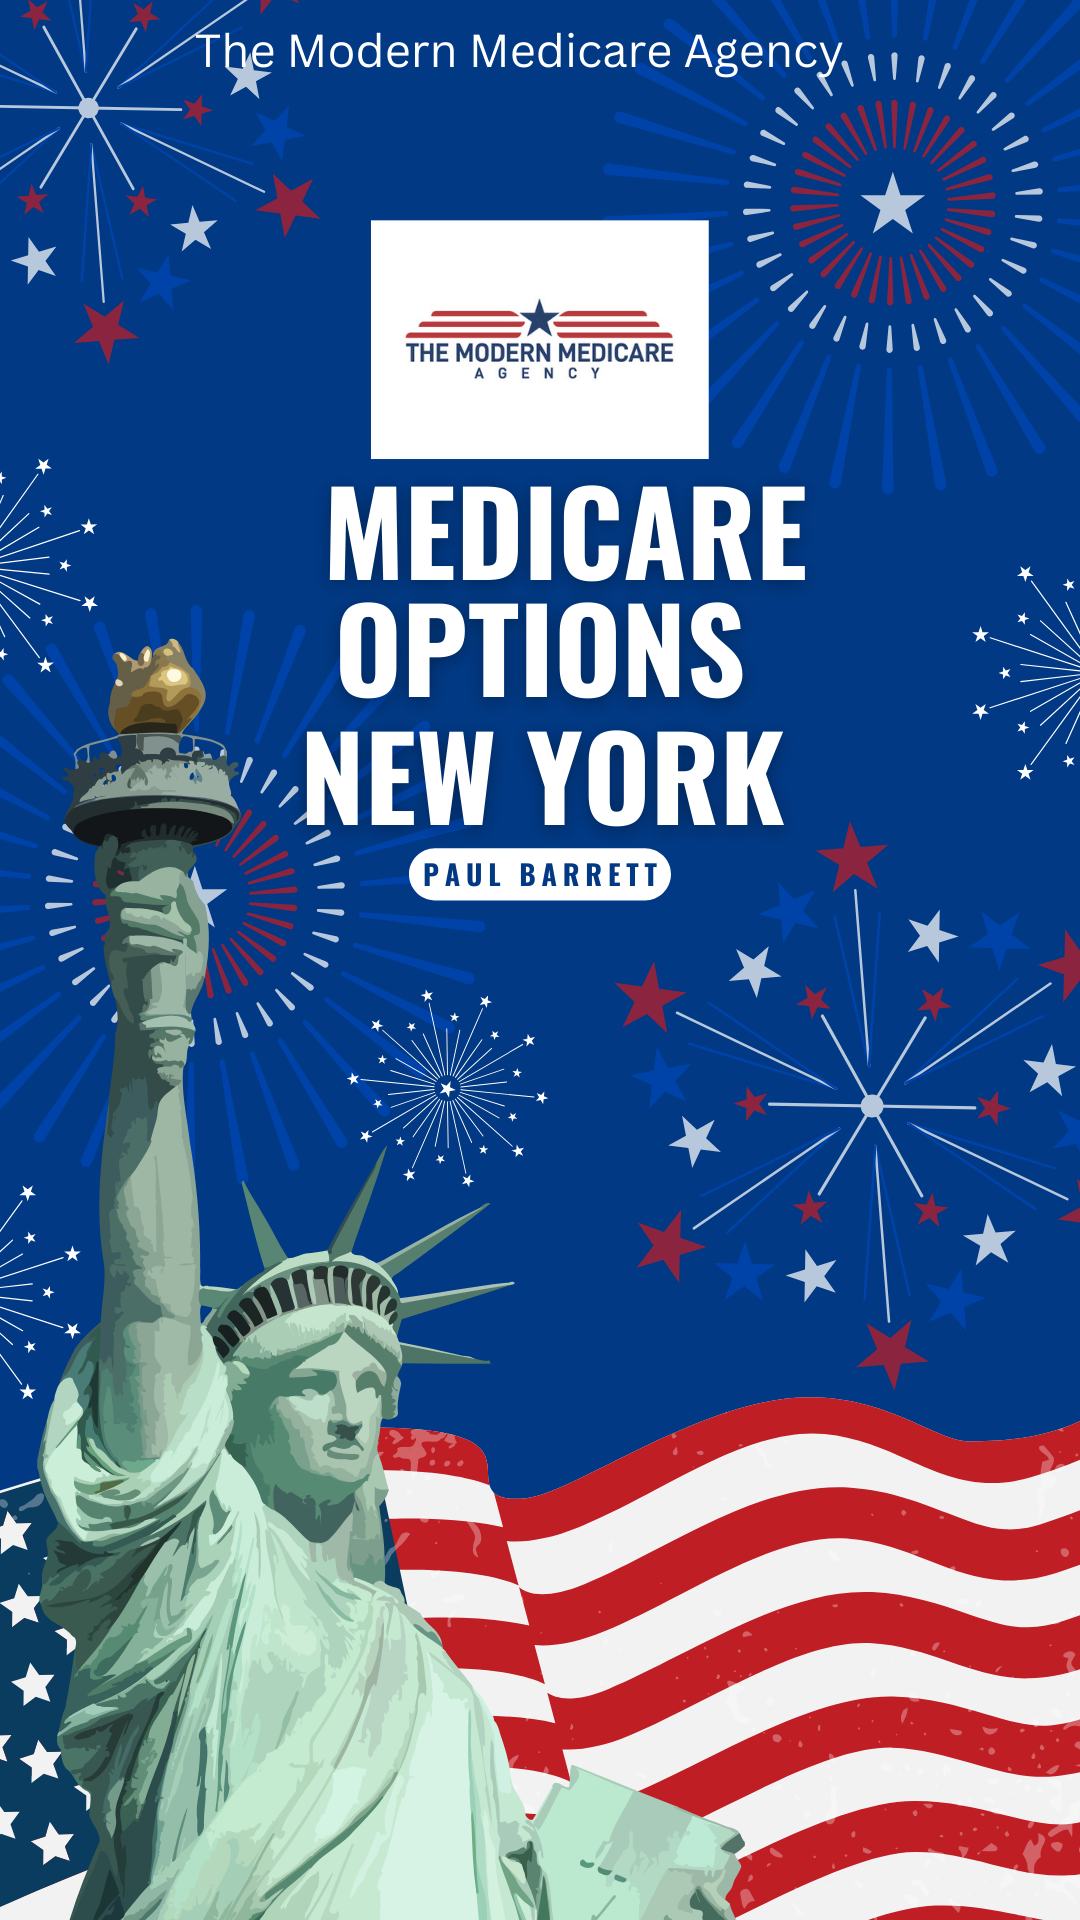 Learning Medicare options in NY